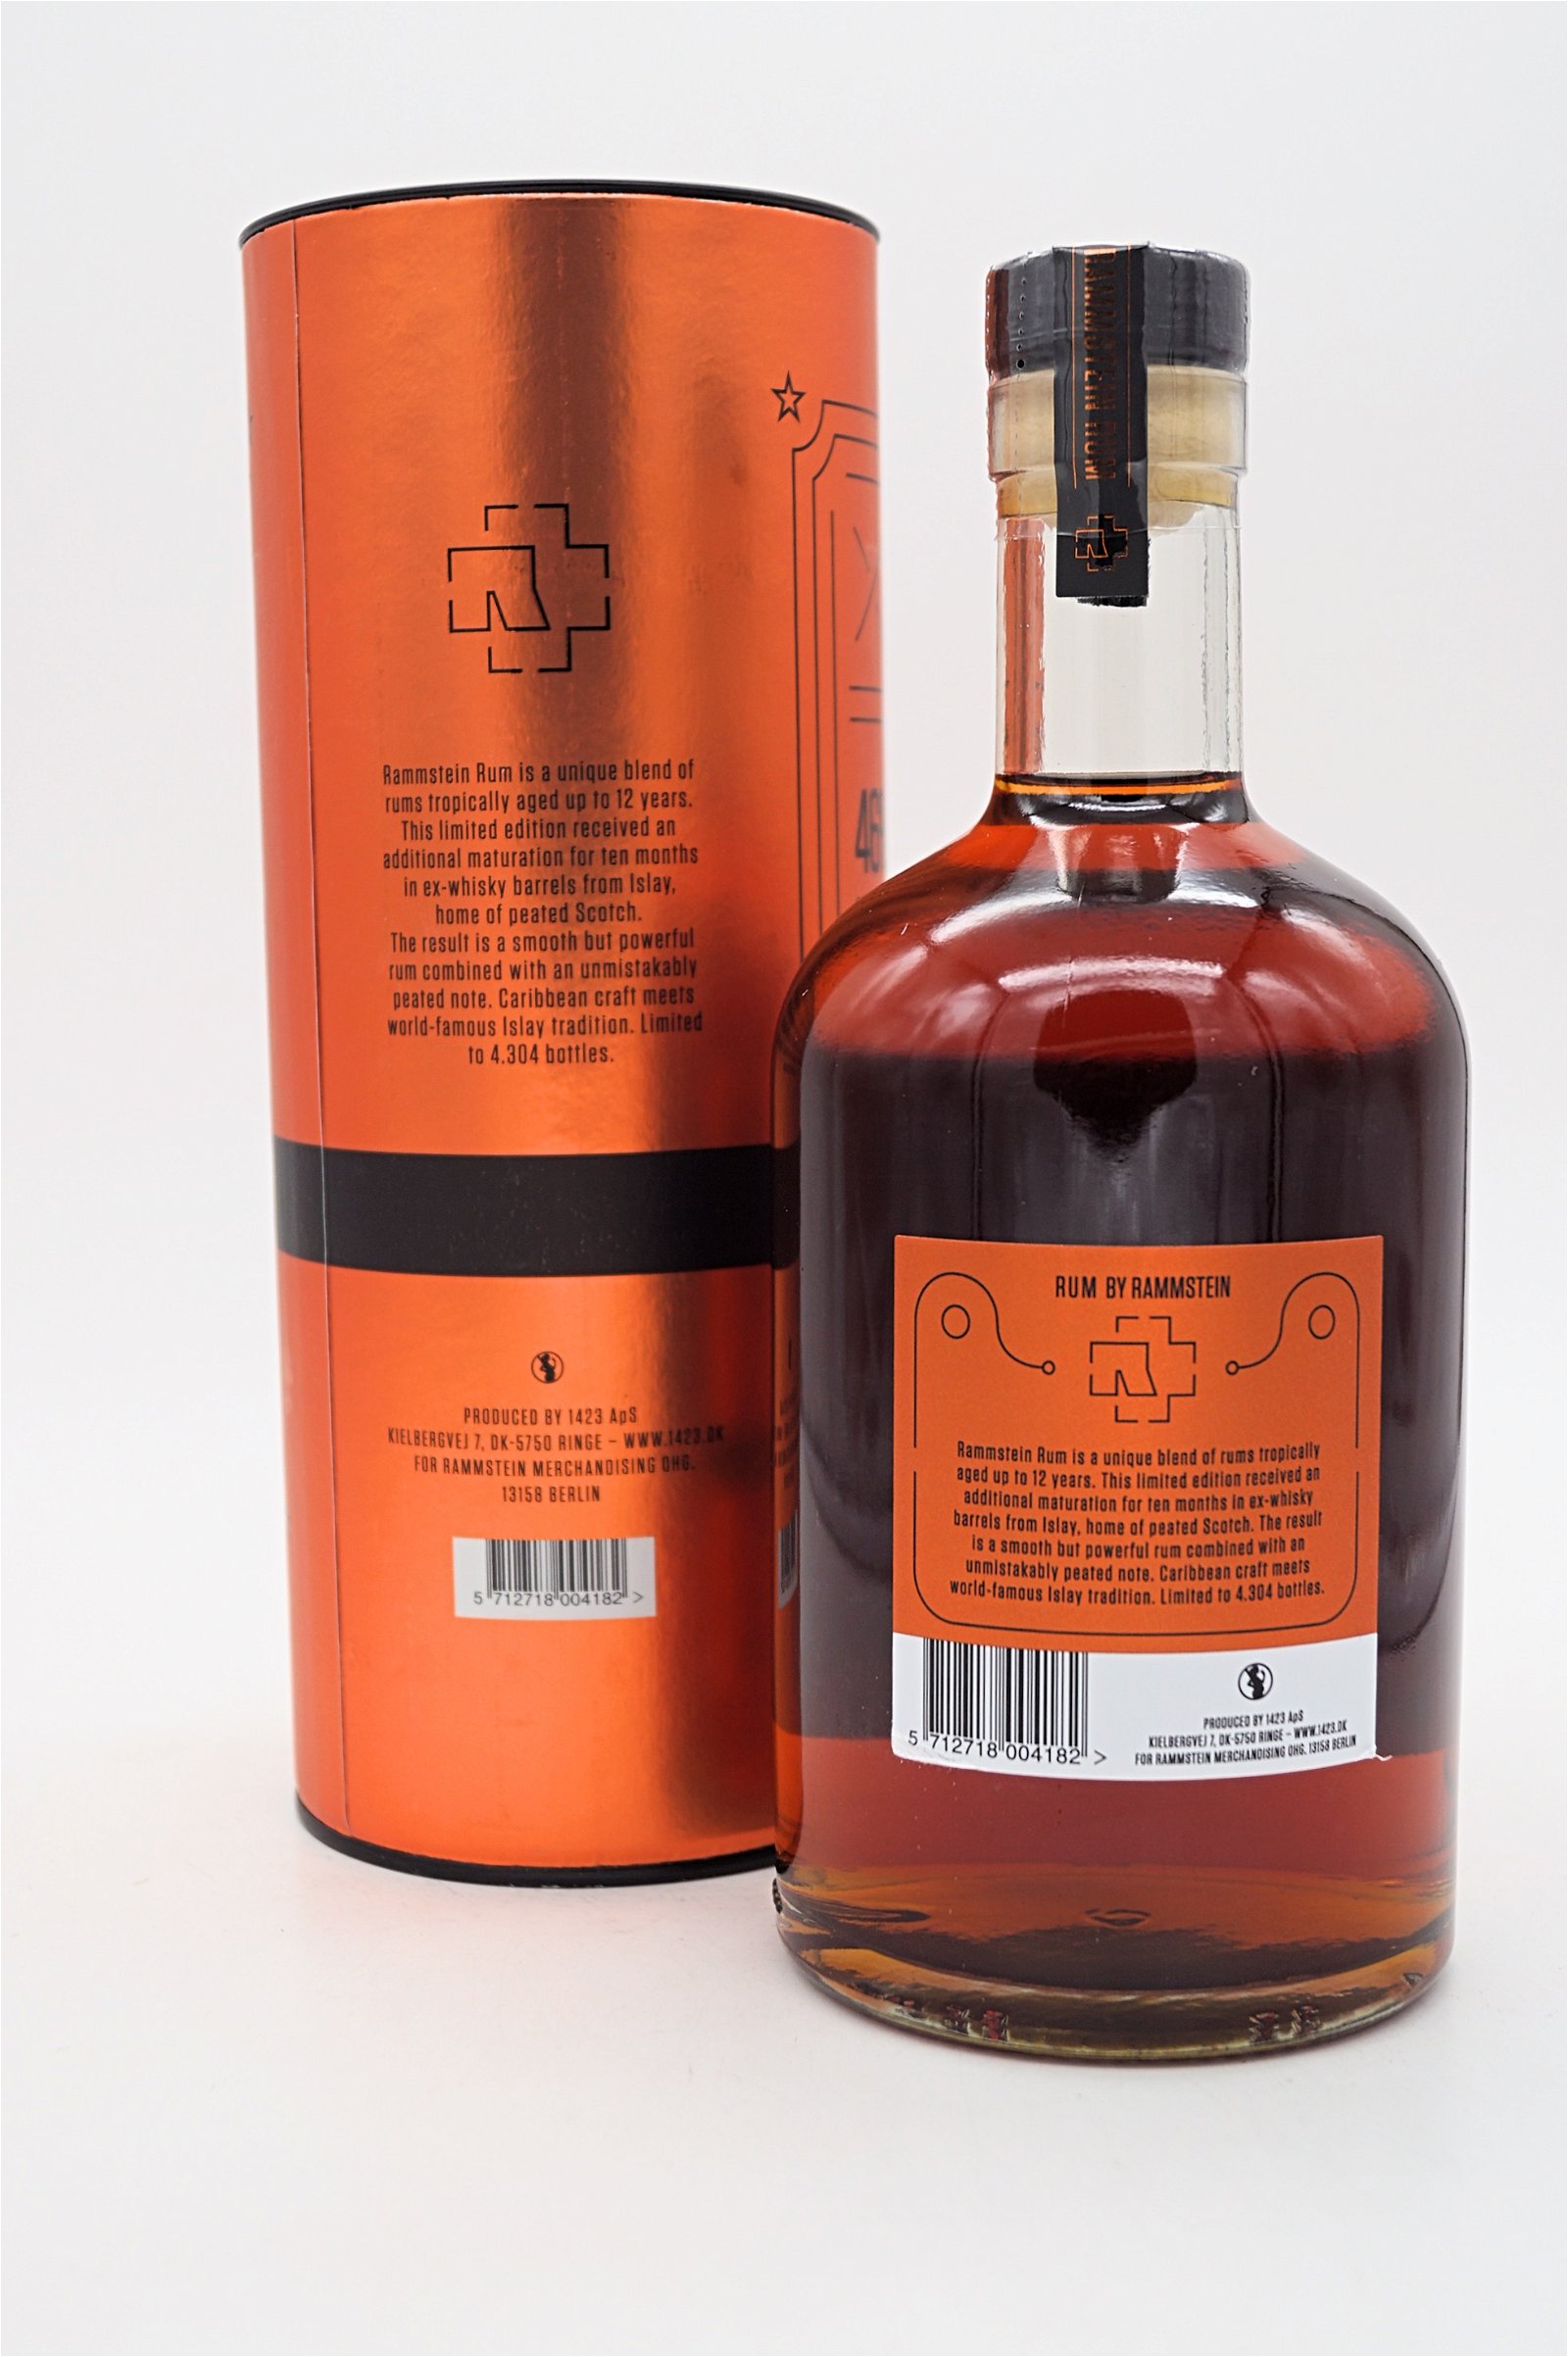 Rammstein Rum Limited Edition Islay Whisky Cask Finish 